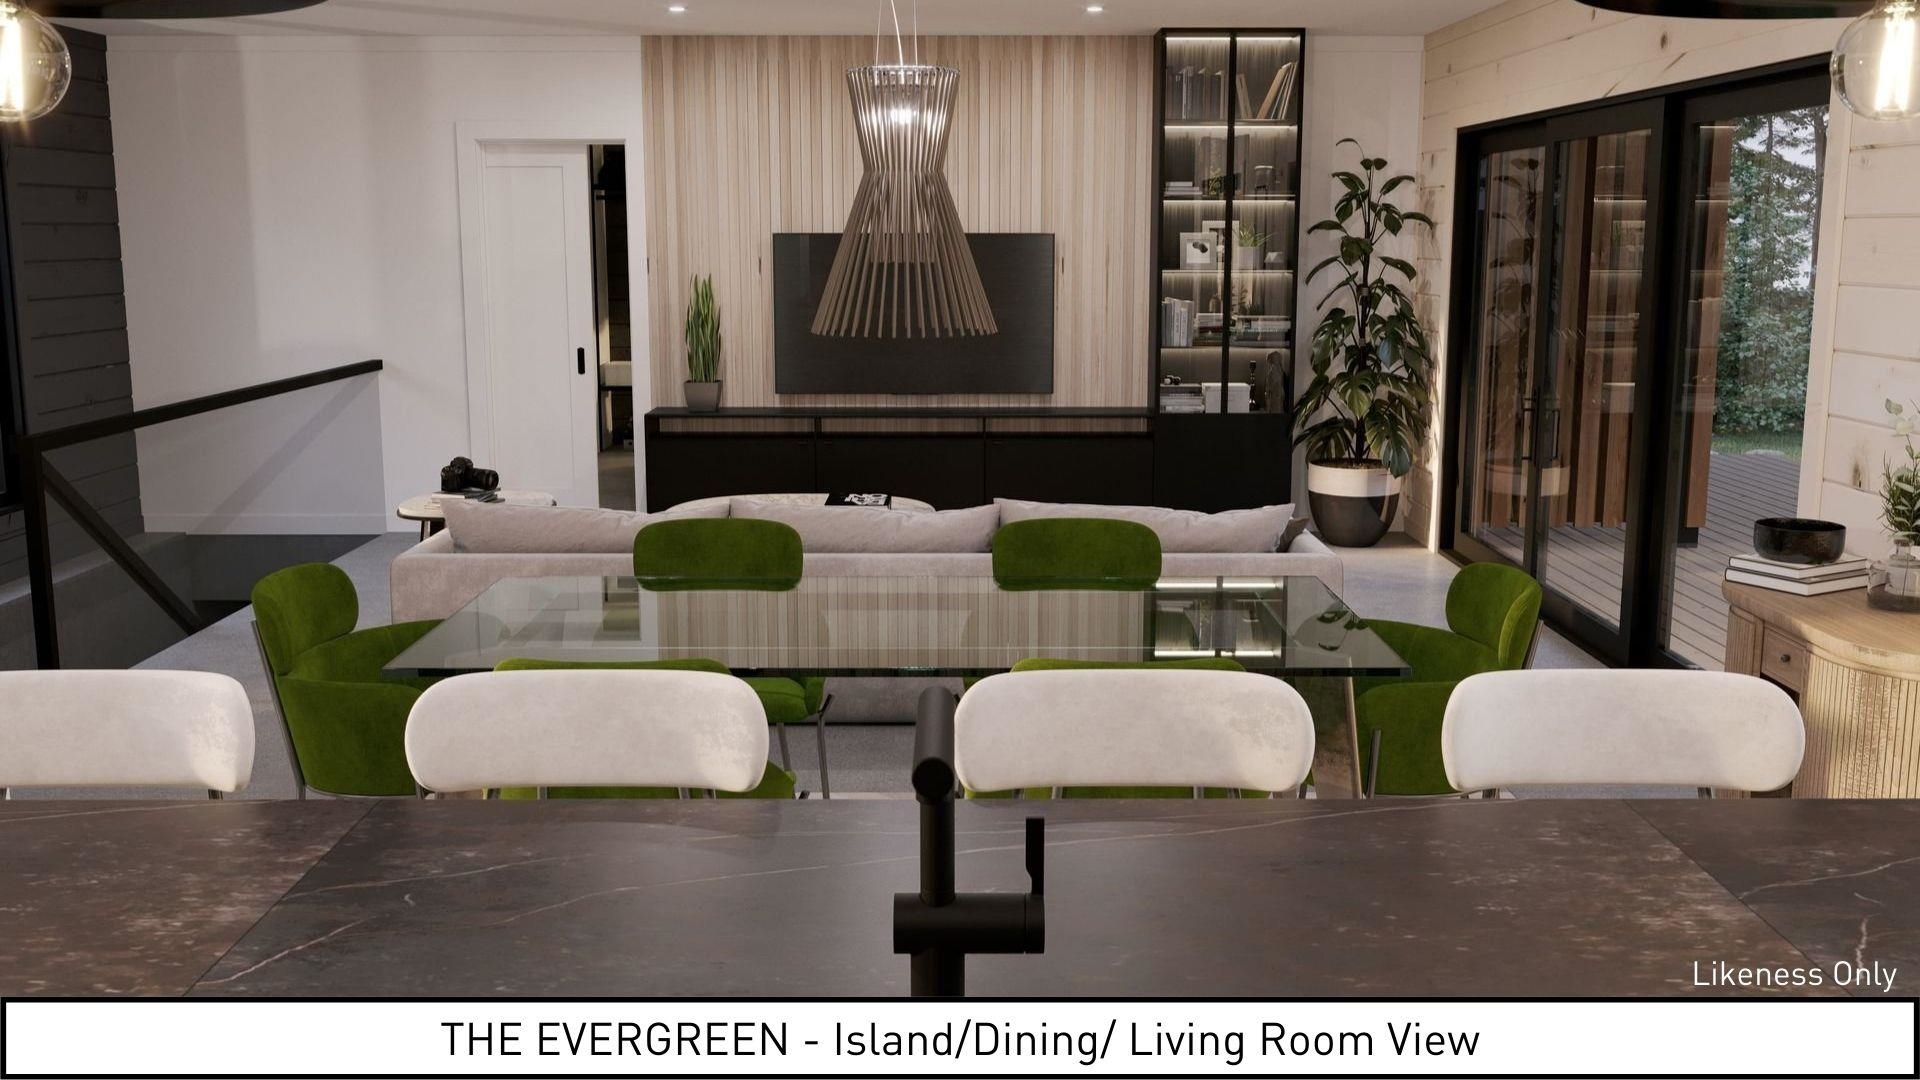 Evergreen Island/Dining/ Living Room View